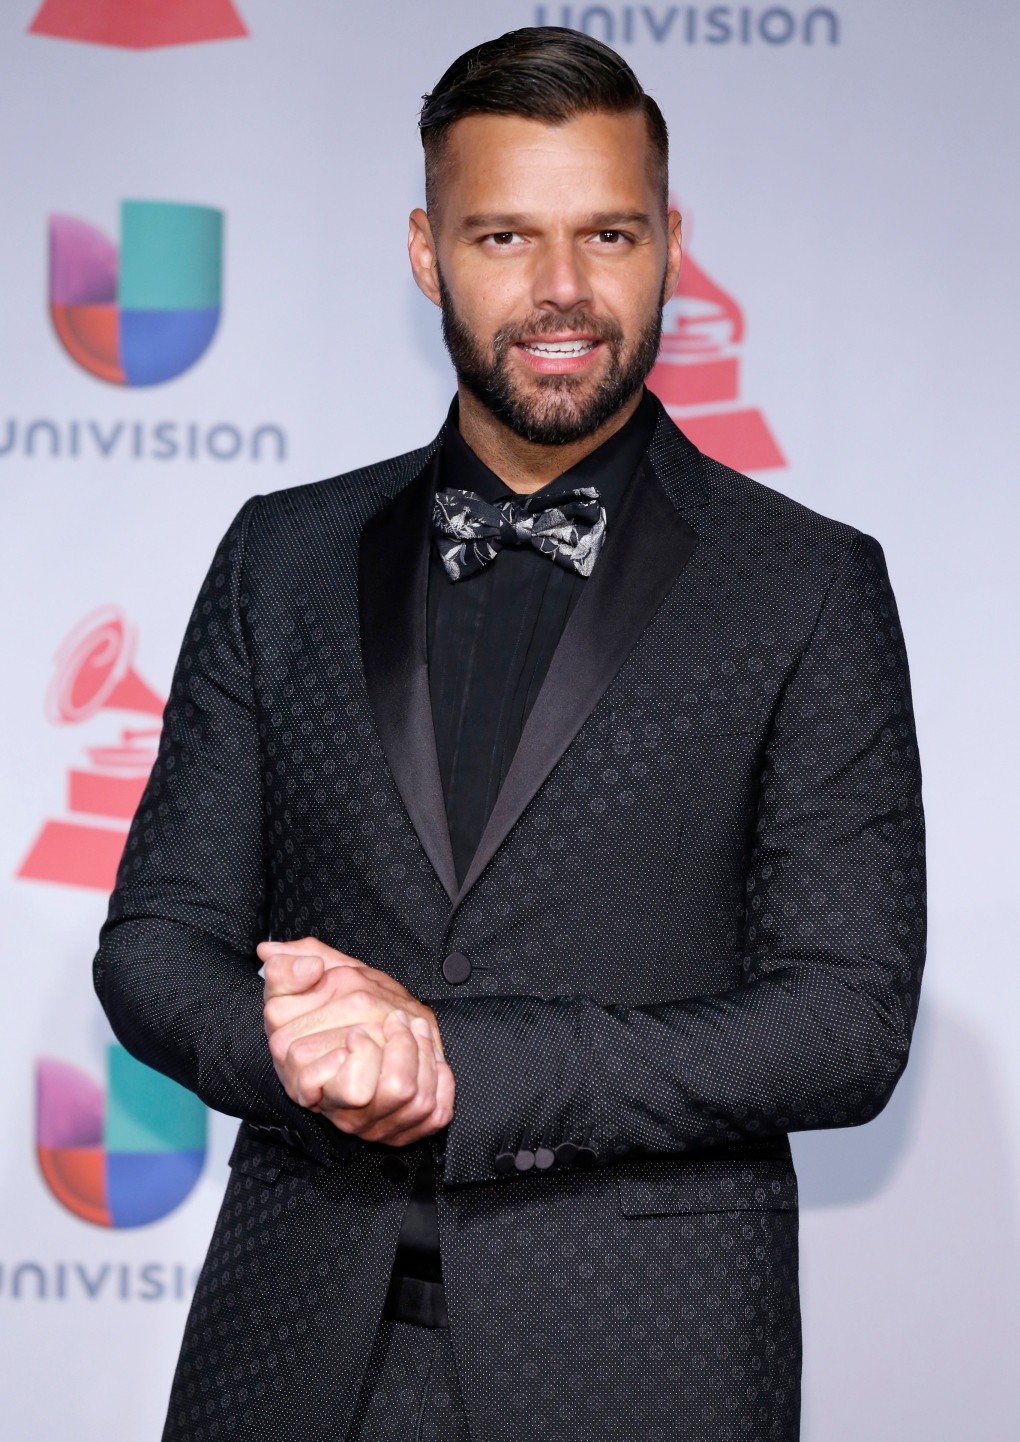 Ricky Martin says he wants a daughter | CTV News